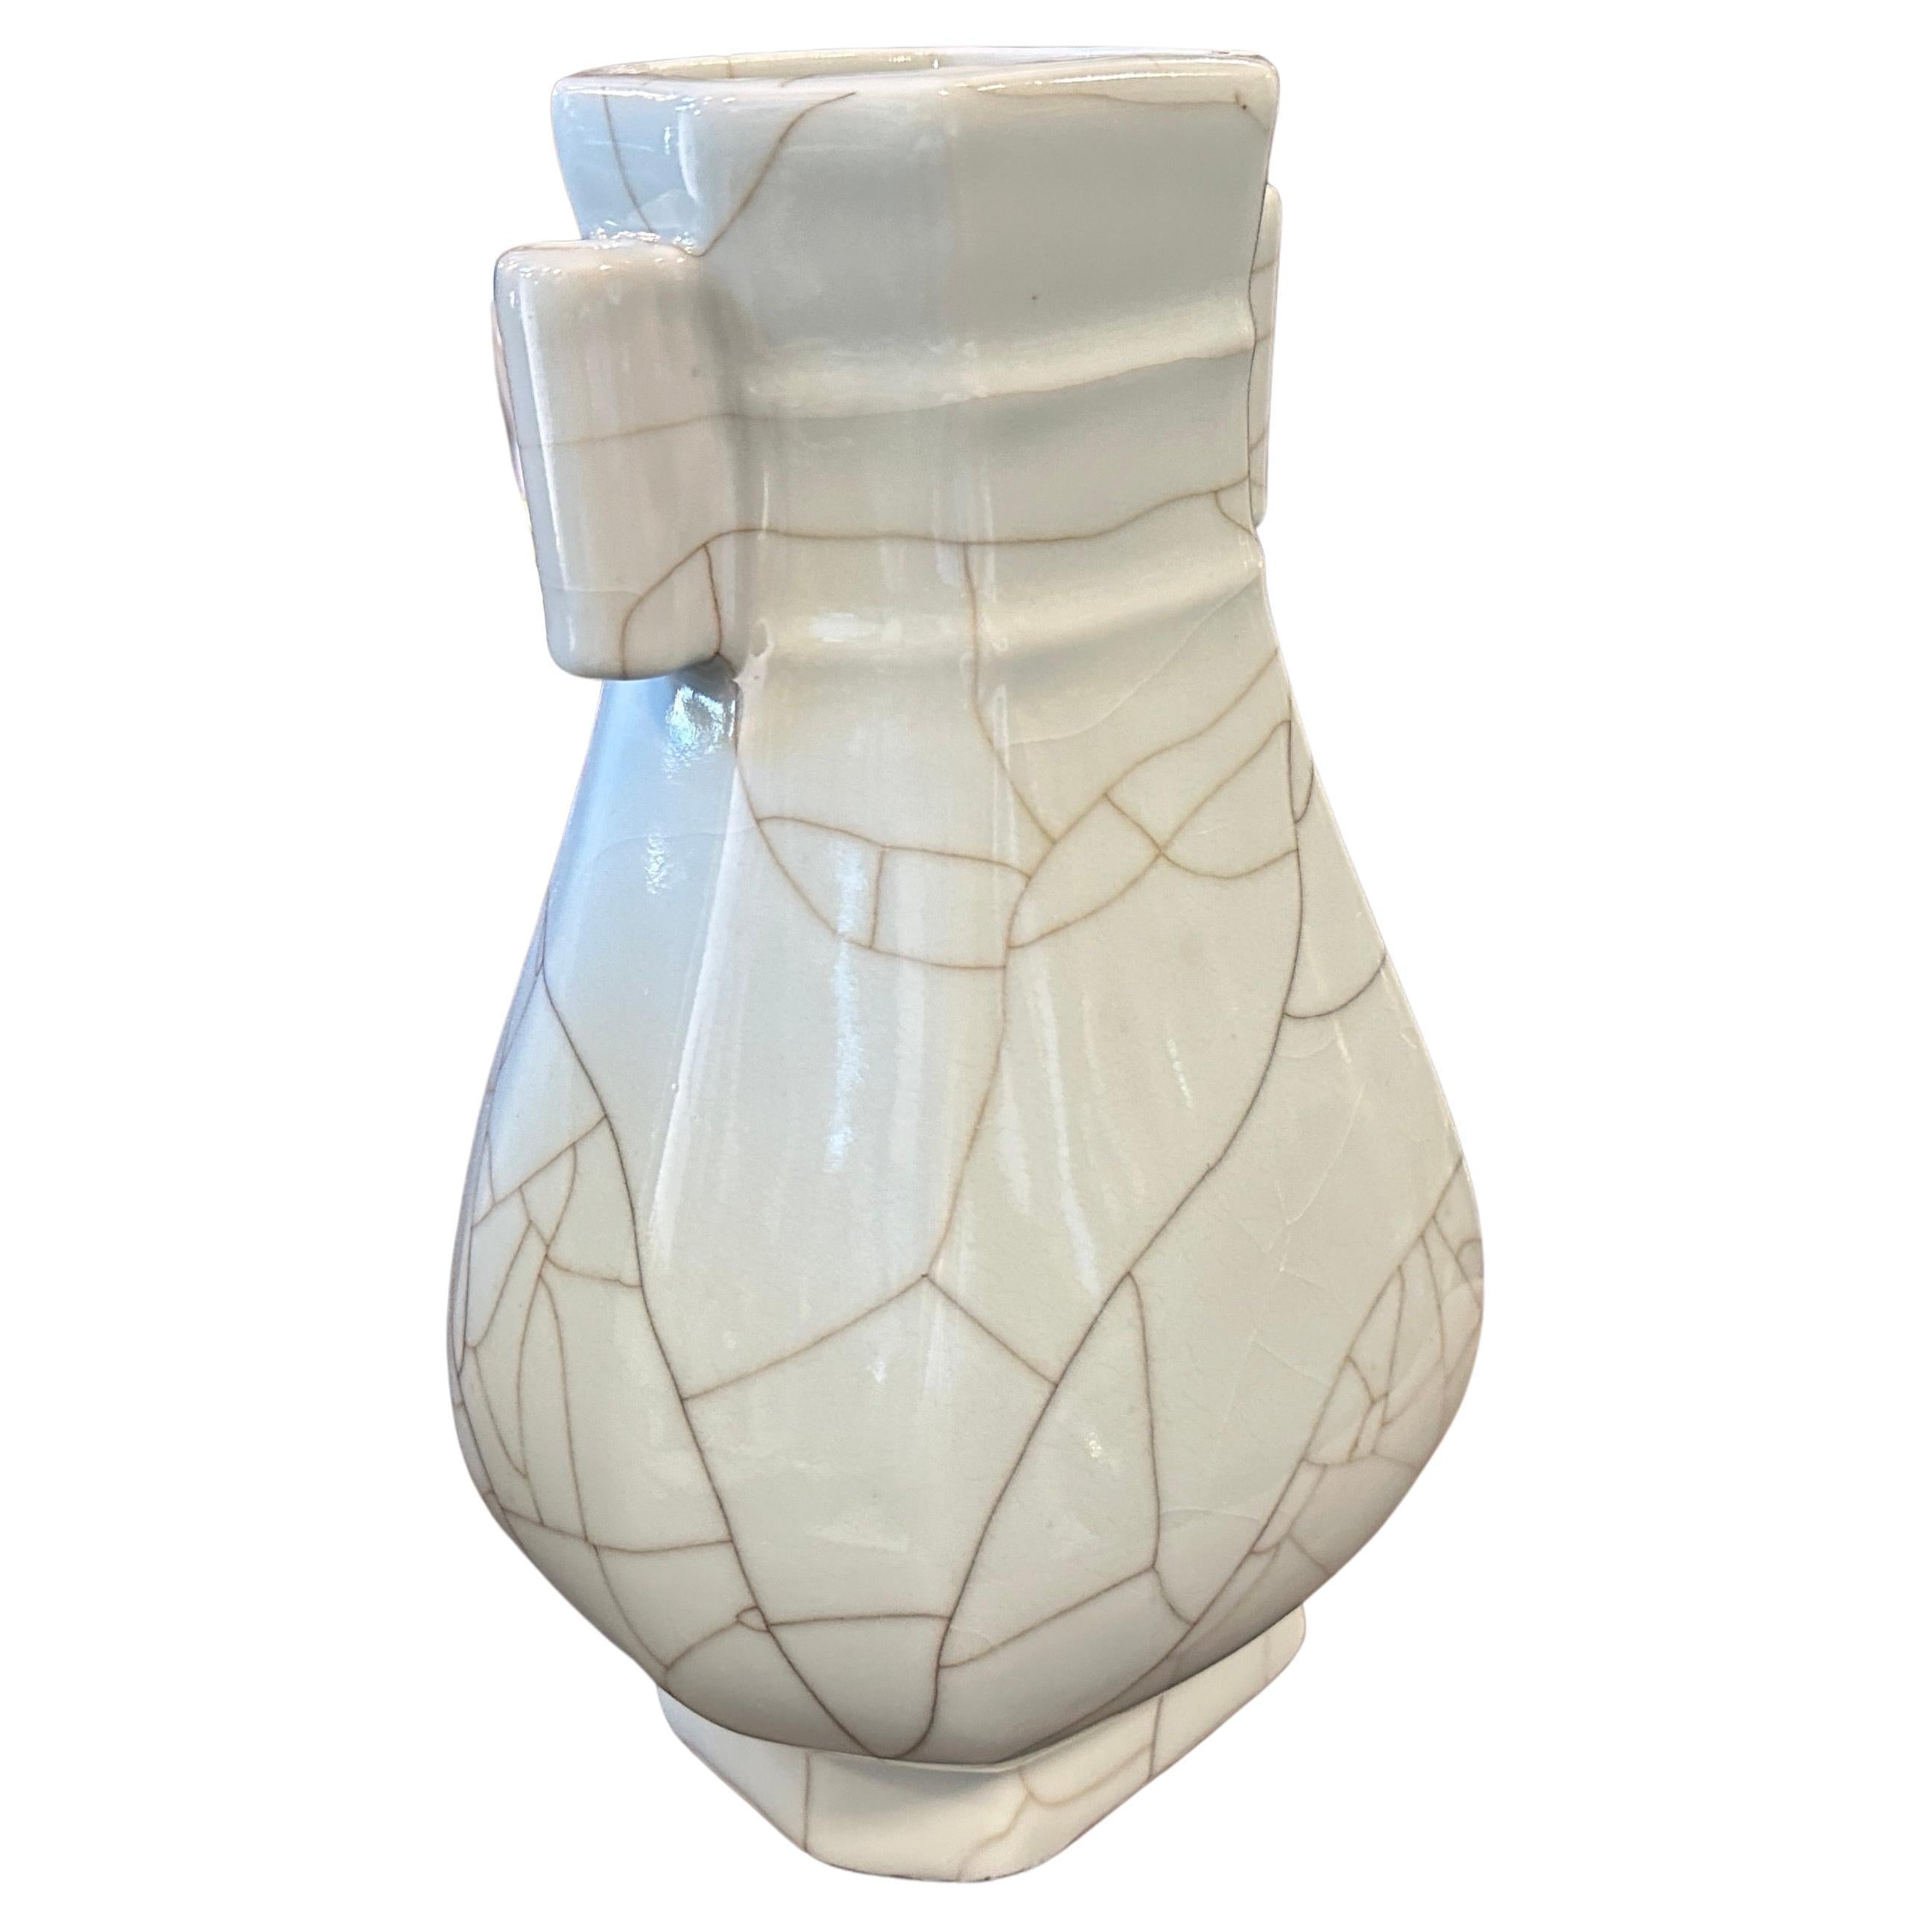 A simple and elegant well shaped Celadon vase manufactured in China in the late 19th century, the vase is covered overall with a crackled grey celadon glaze. The glaze it's smooth and even, with a slight sheen that catches the light, neck is flanked